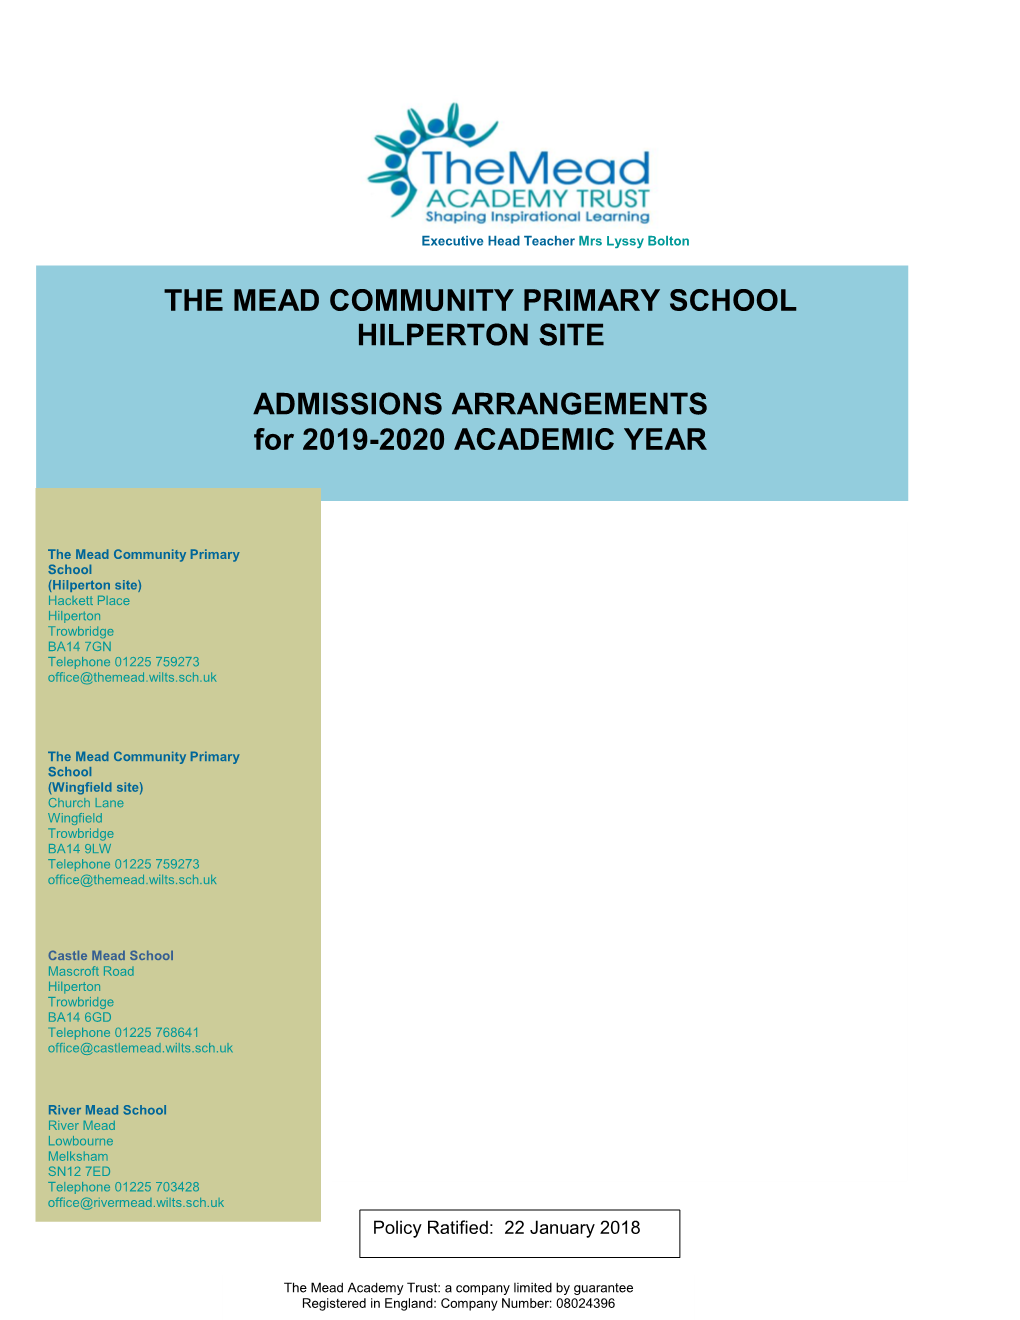 THE MEAD COMMUNITY PRIMARY SCHOOL HILPERTON SITE ADMISSIONS ARRANGEMENTS for 2019-2020 ACADEMIC YEAR